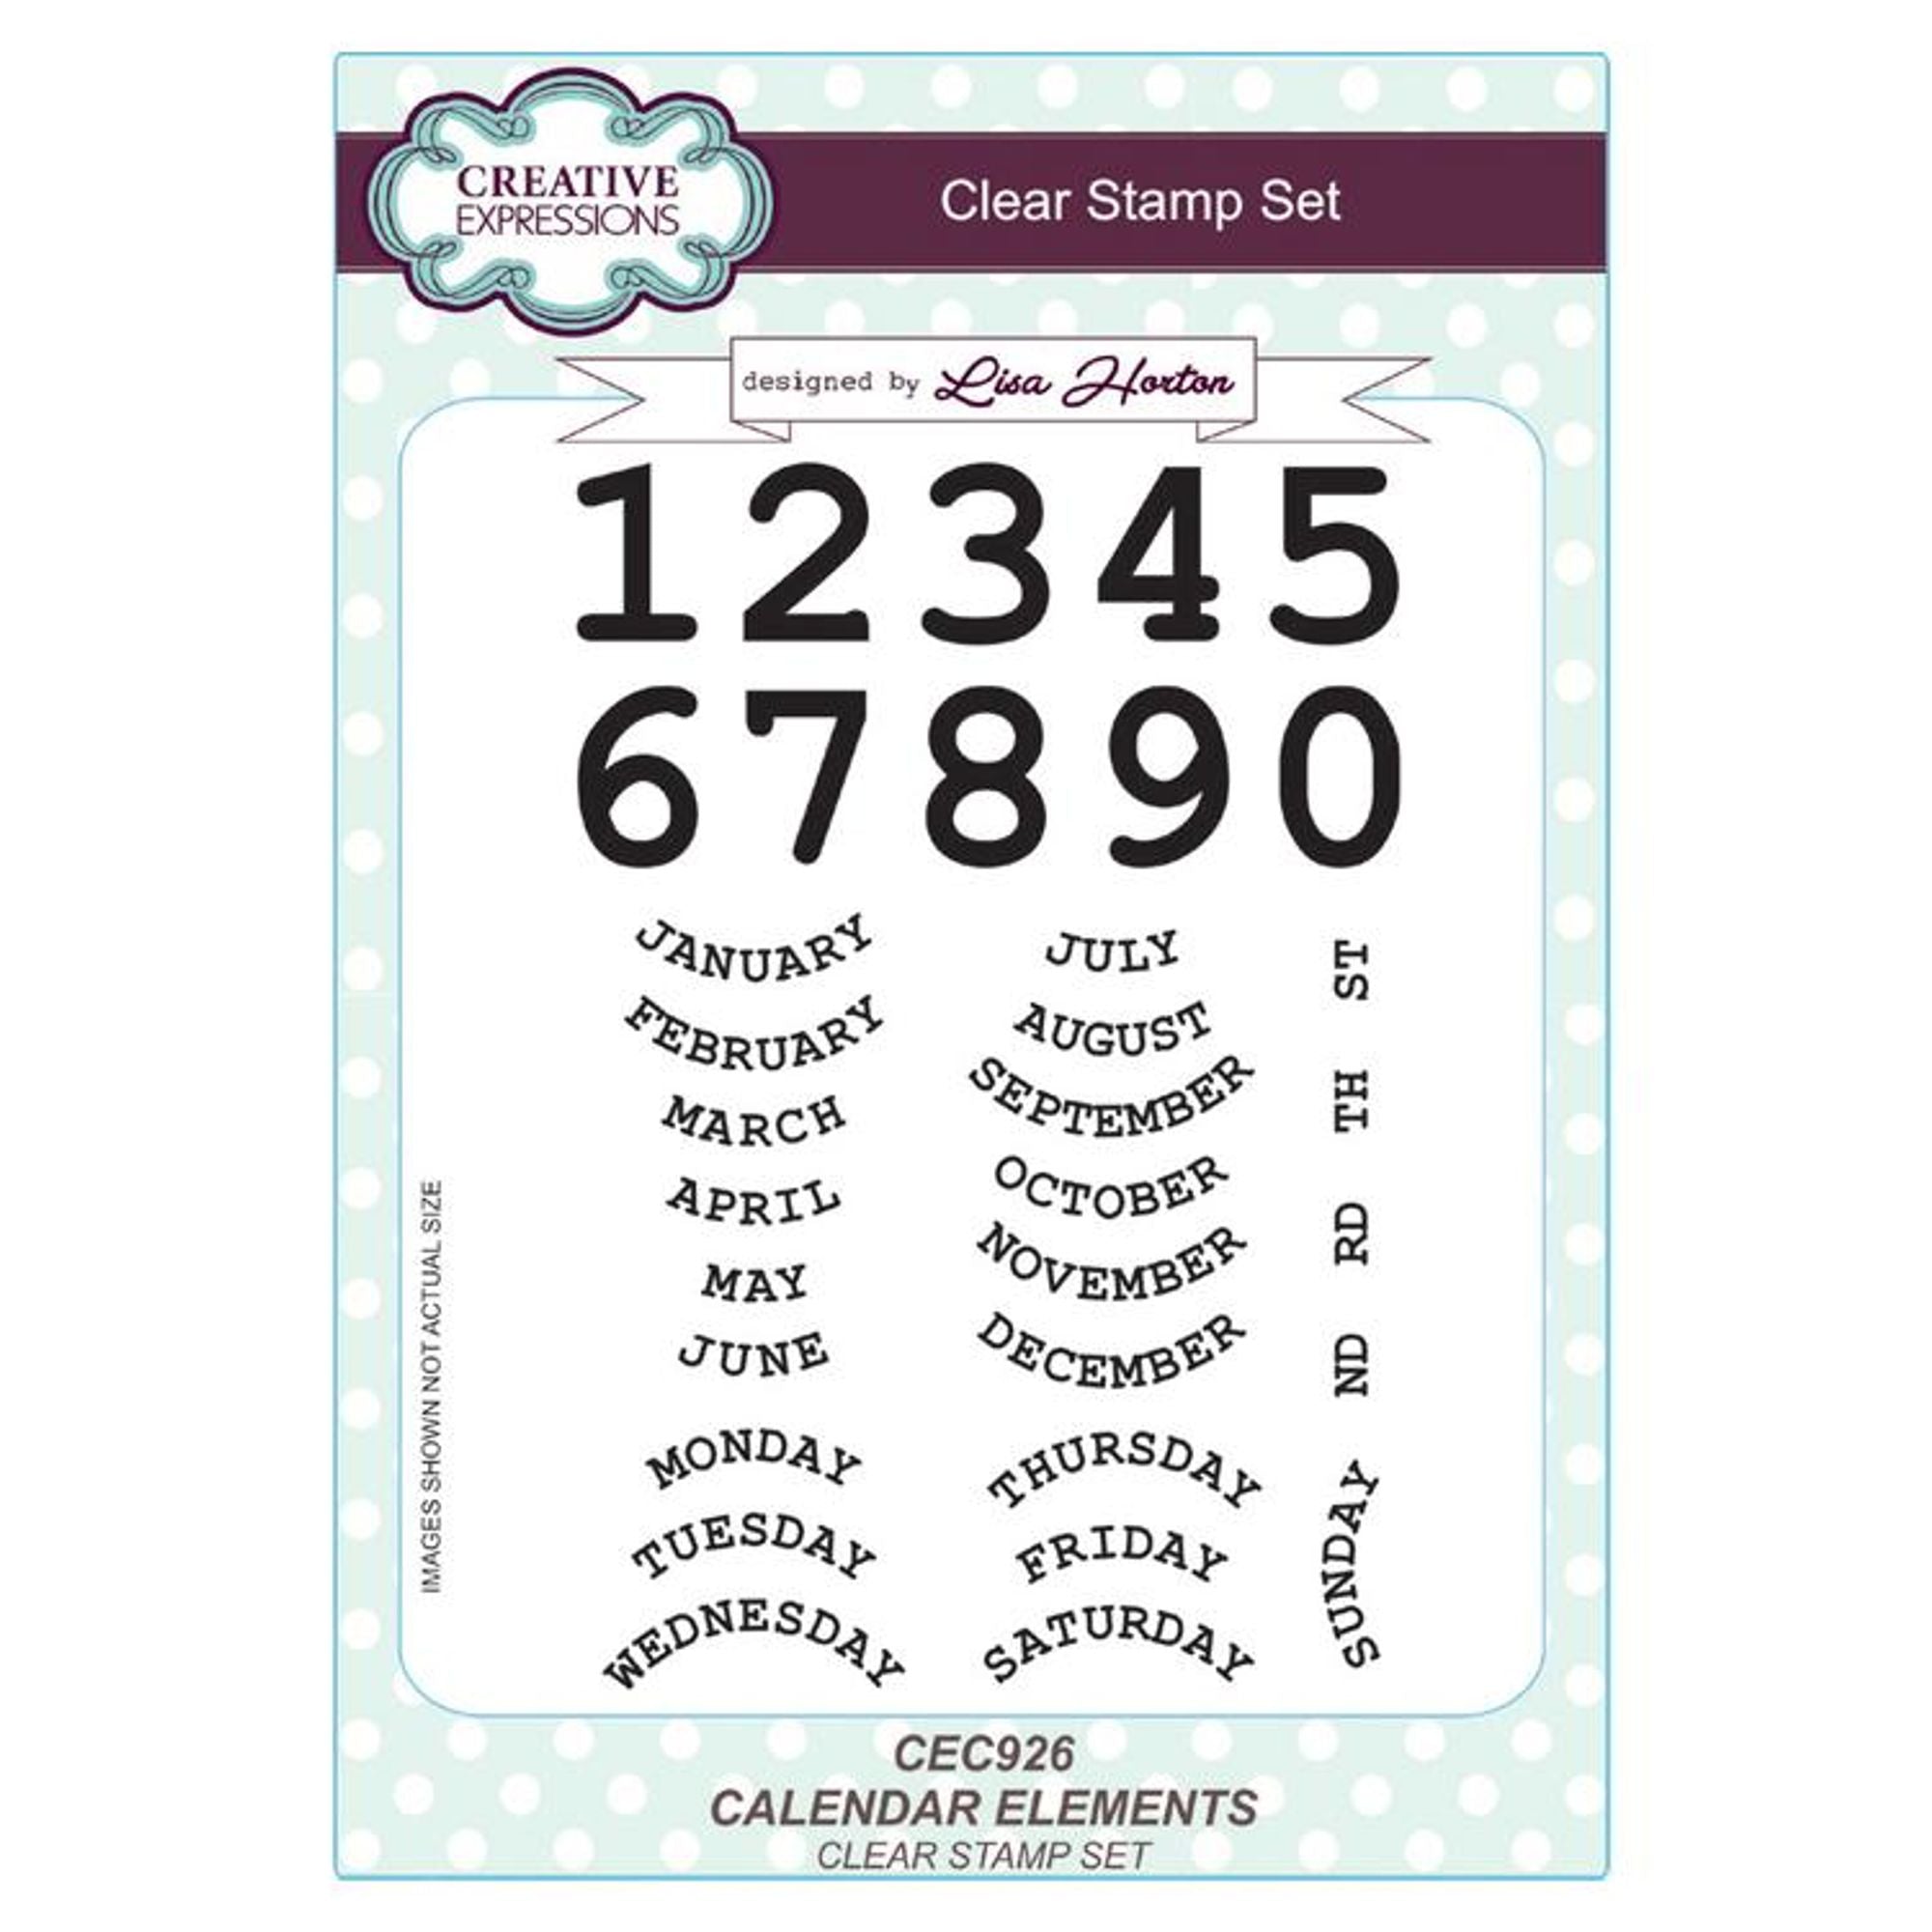 Creative Expressions A5 Artist Trading Clear Stamp Set Calendar Elements